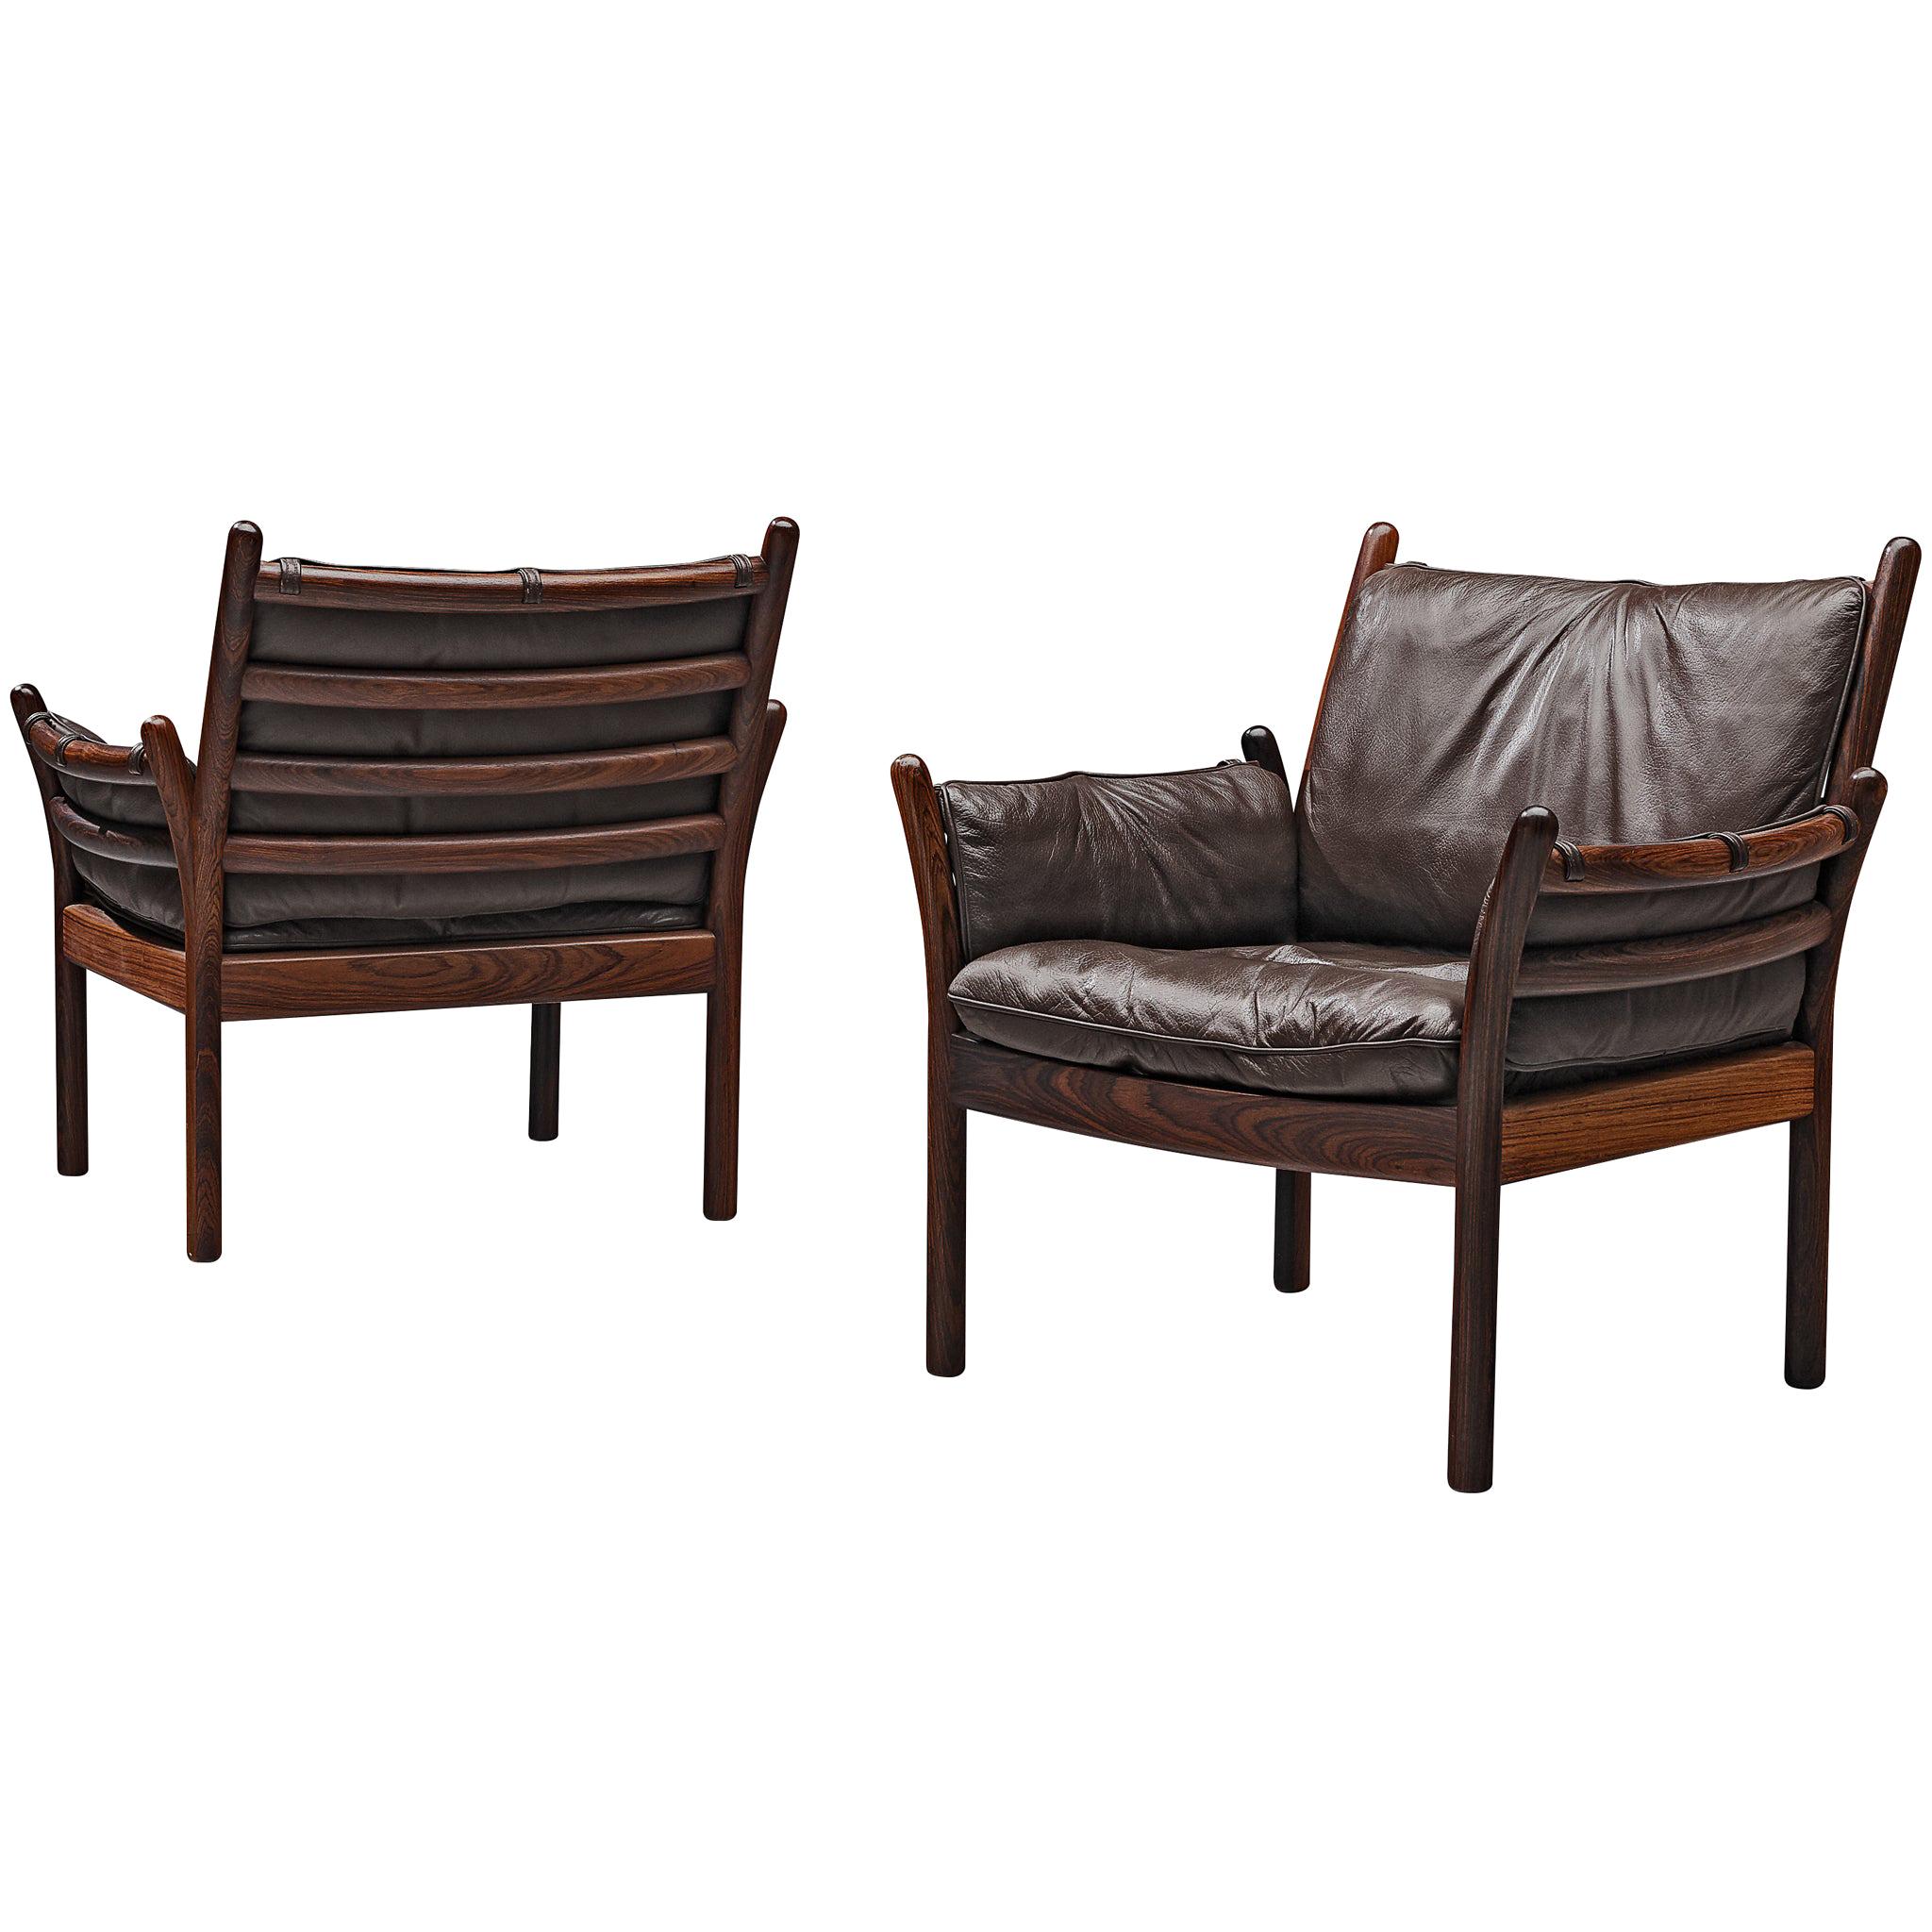 Pair of 'Genius' Chair in Rosewood and Brown Leather by Illum Wikkelsø